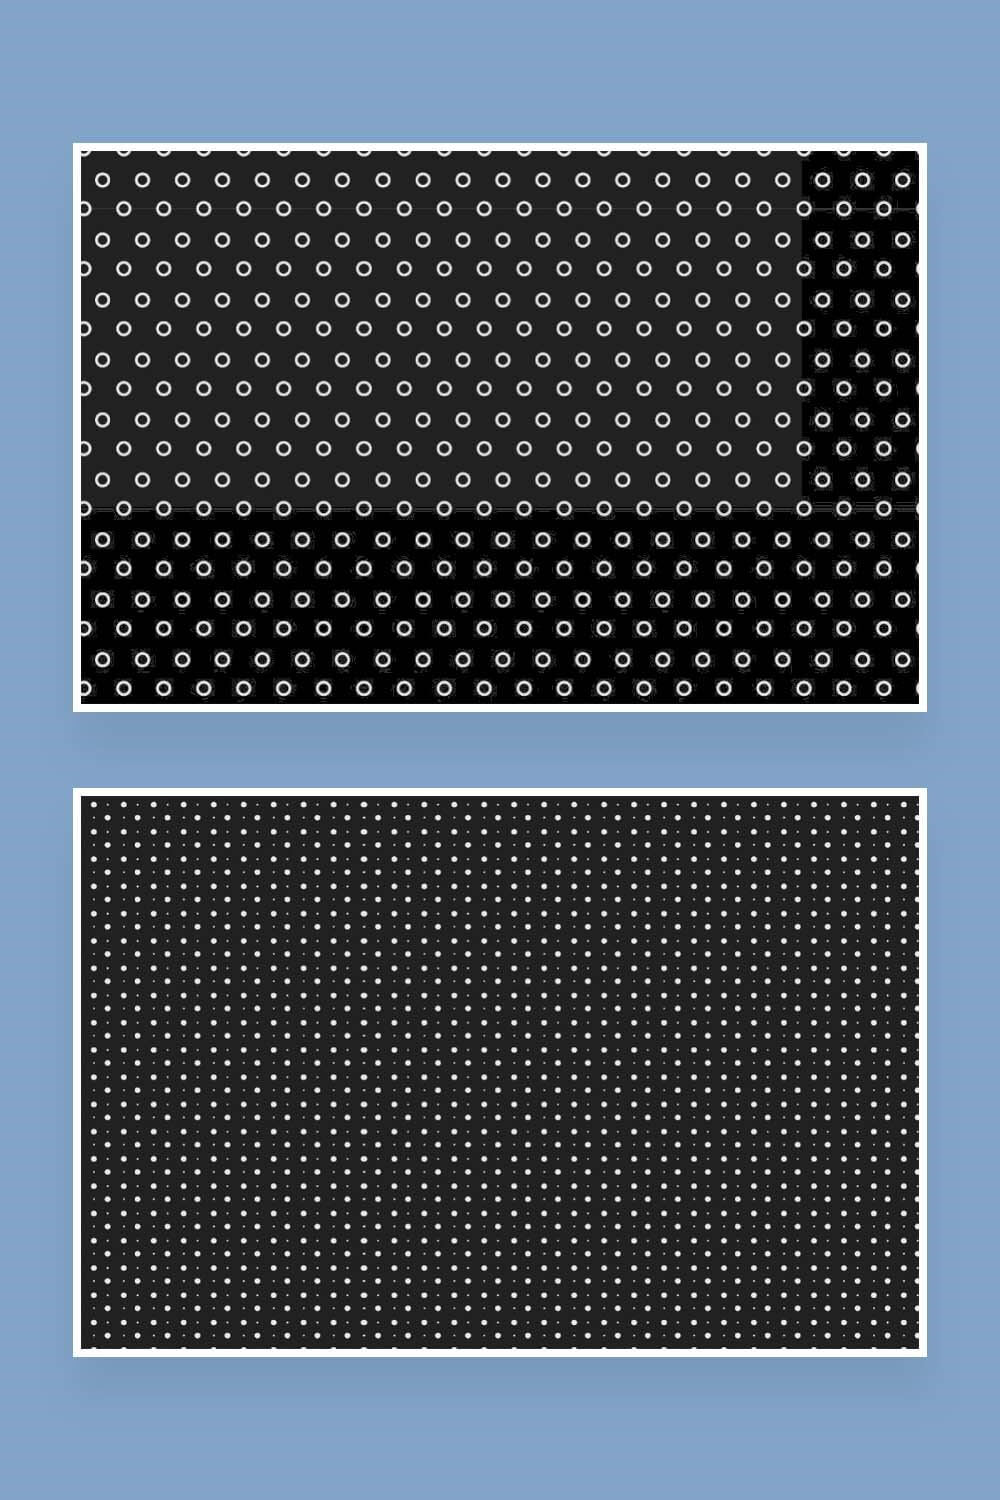 Two types of dotted seamless patterns: hollow and solid dots.